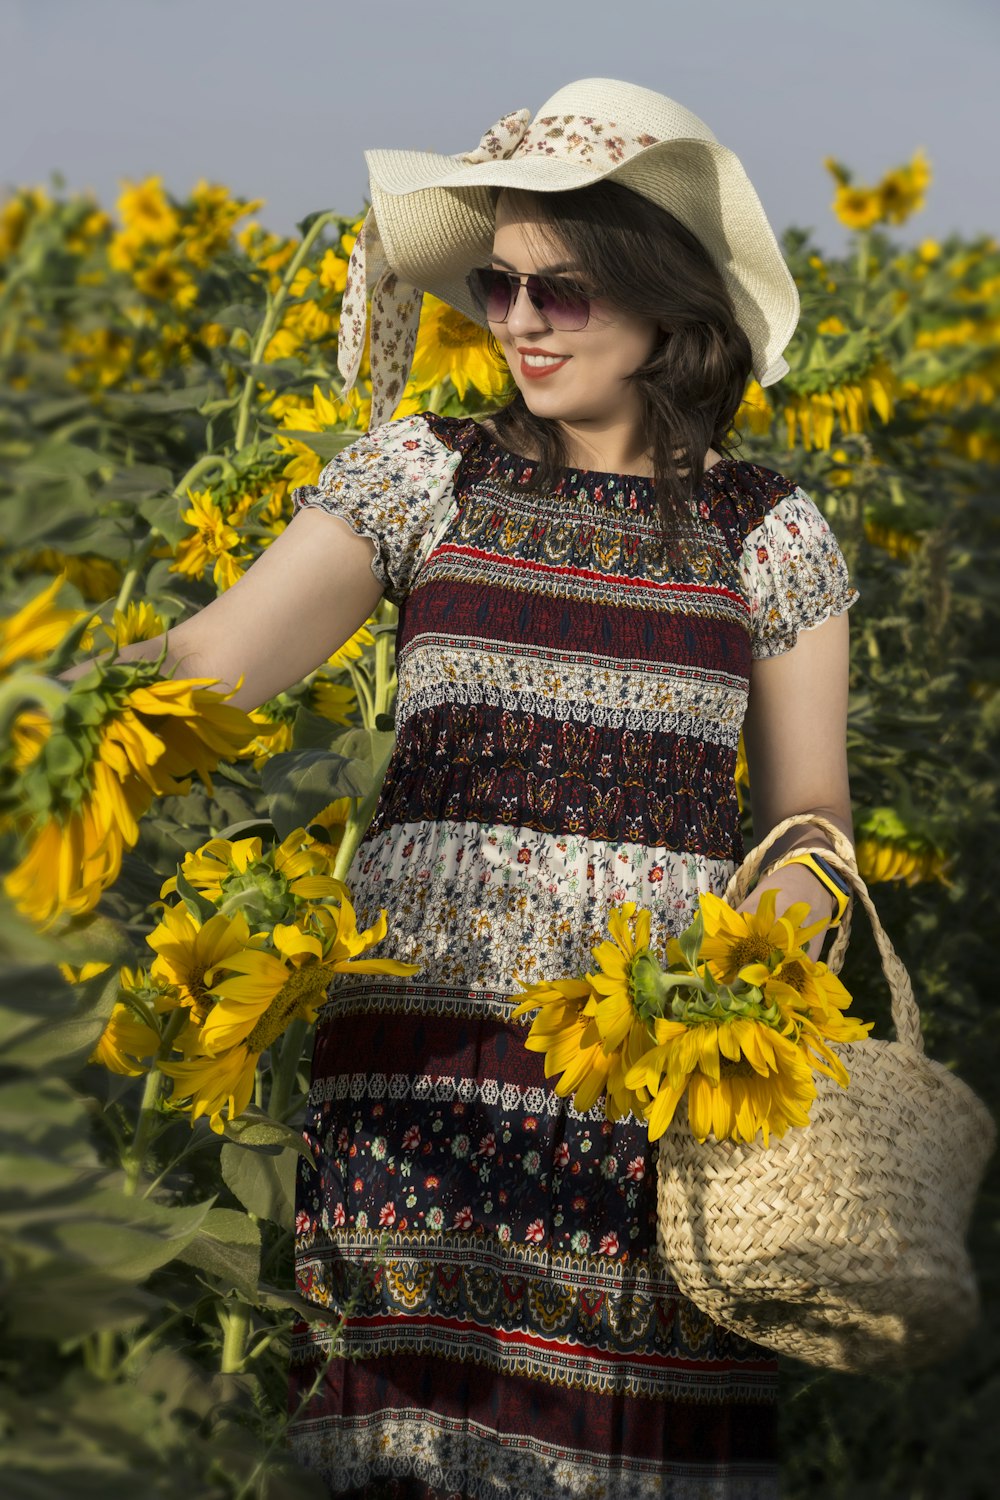 a woman in a sunflower field holding a basket of sunflowers